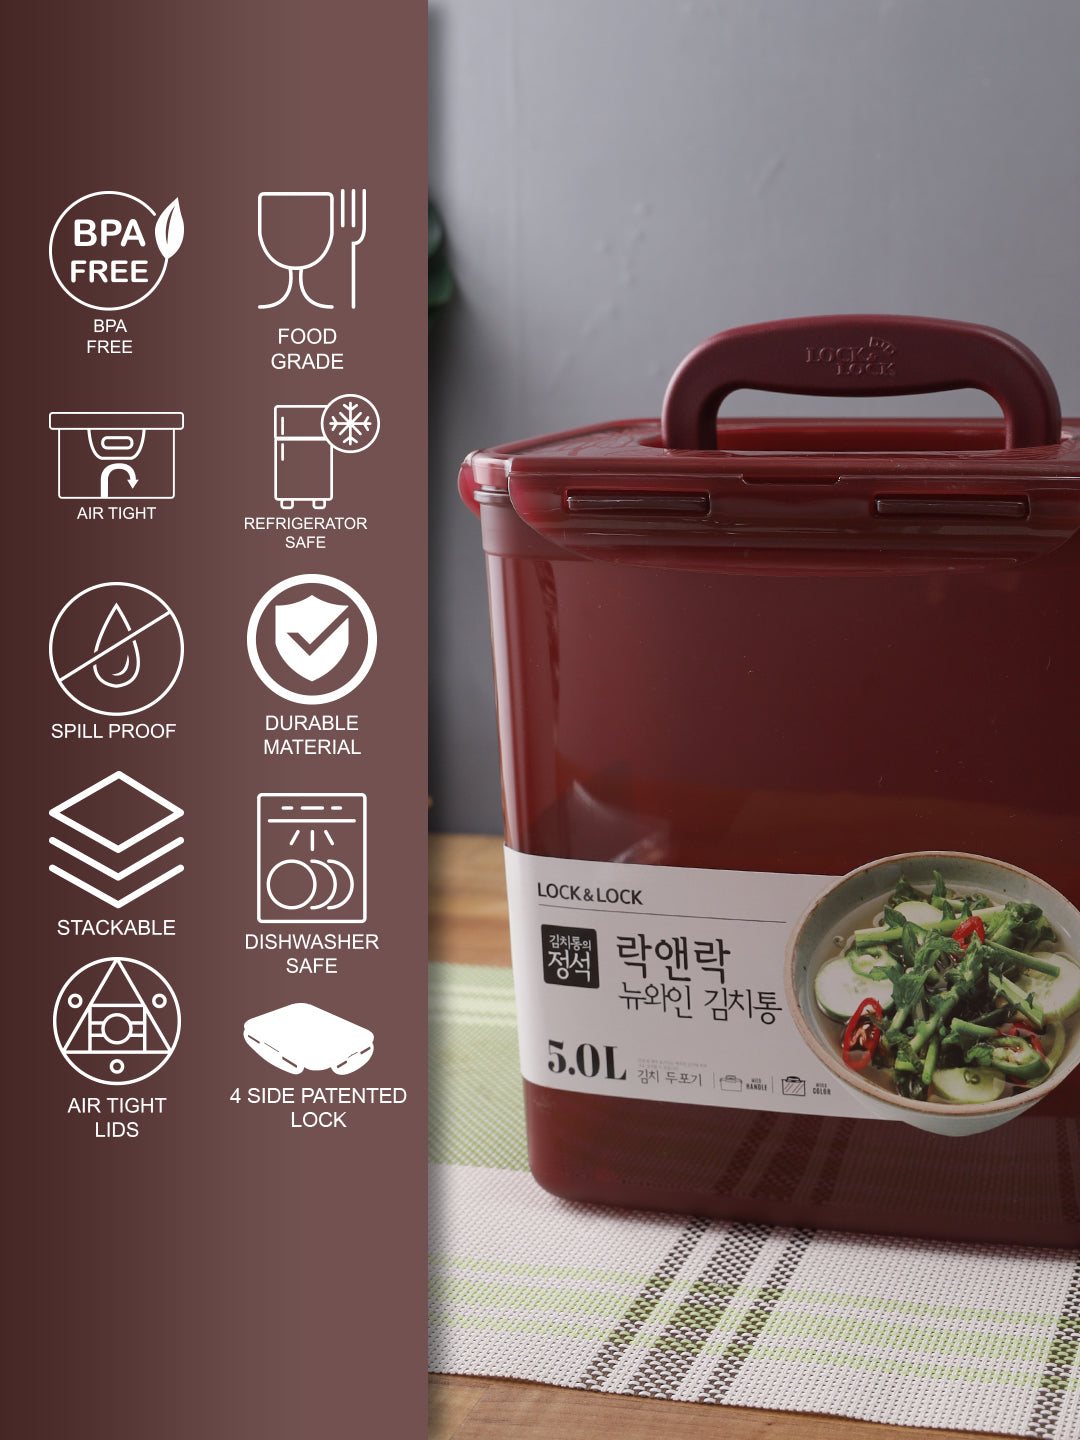 LocknLock Storage Container with Grab Handle and Tray, 5.0 LTR | Red Wine